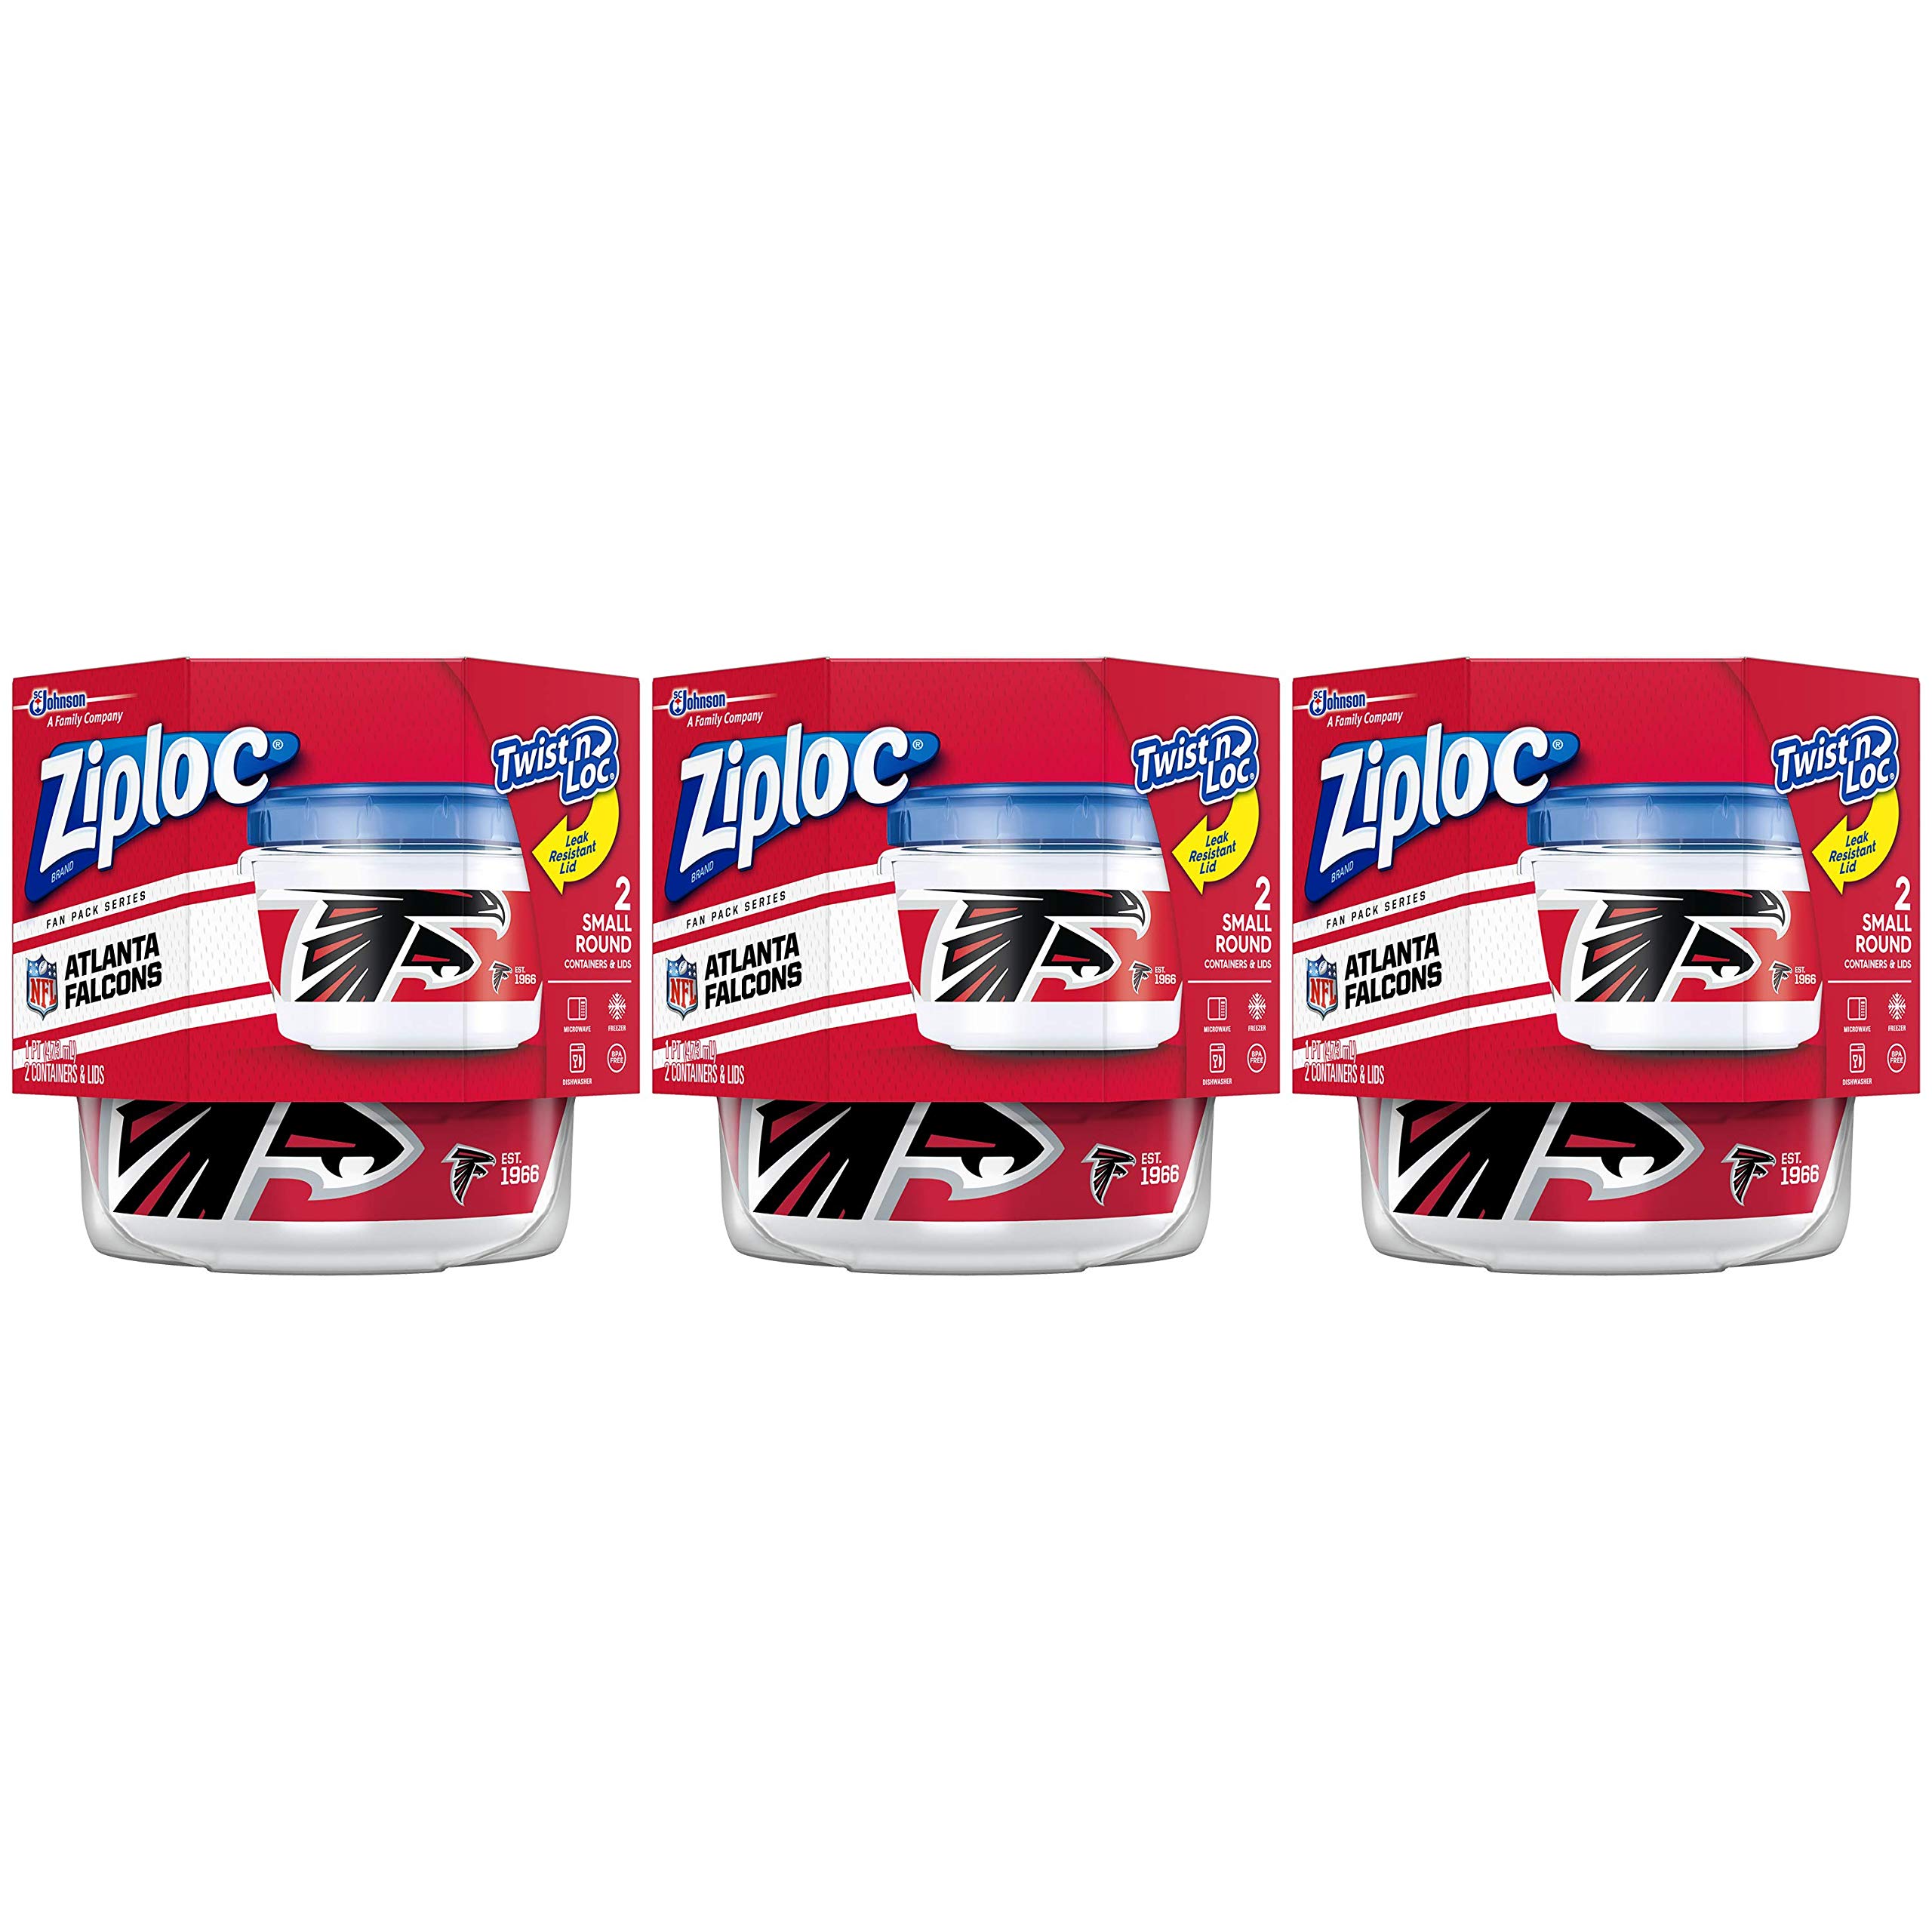 Ziploc Twist N Loc Containers, Small 3 Containers and 3 Lids (Pack